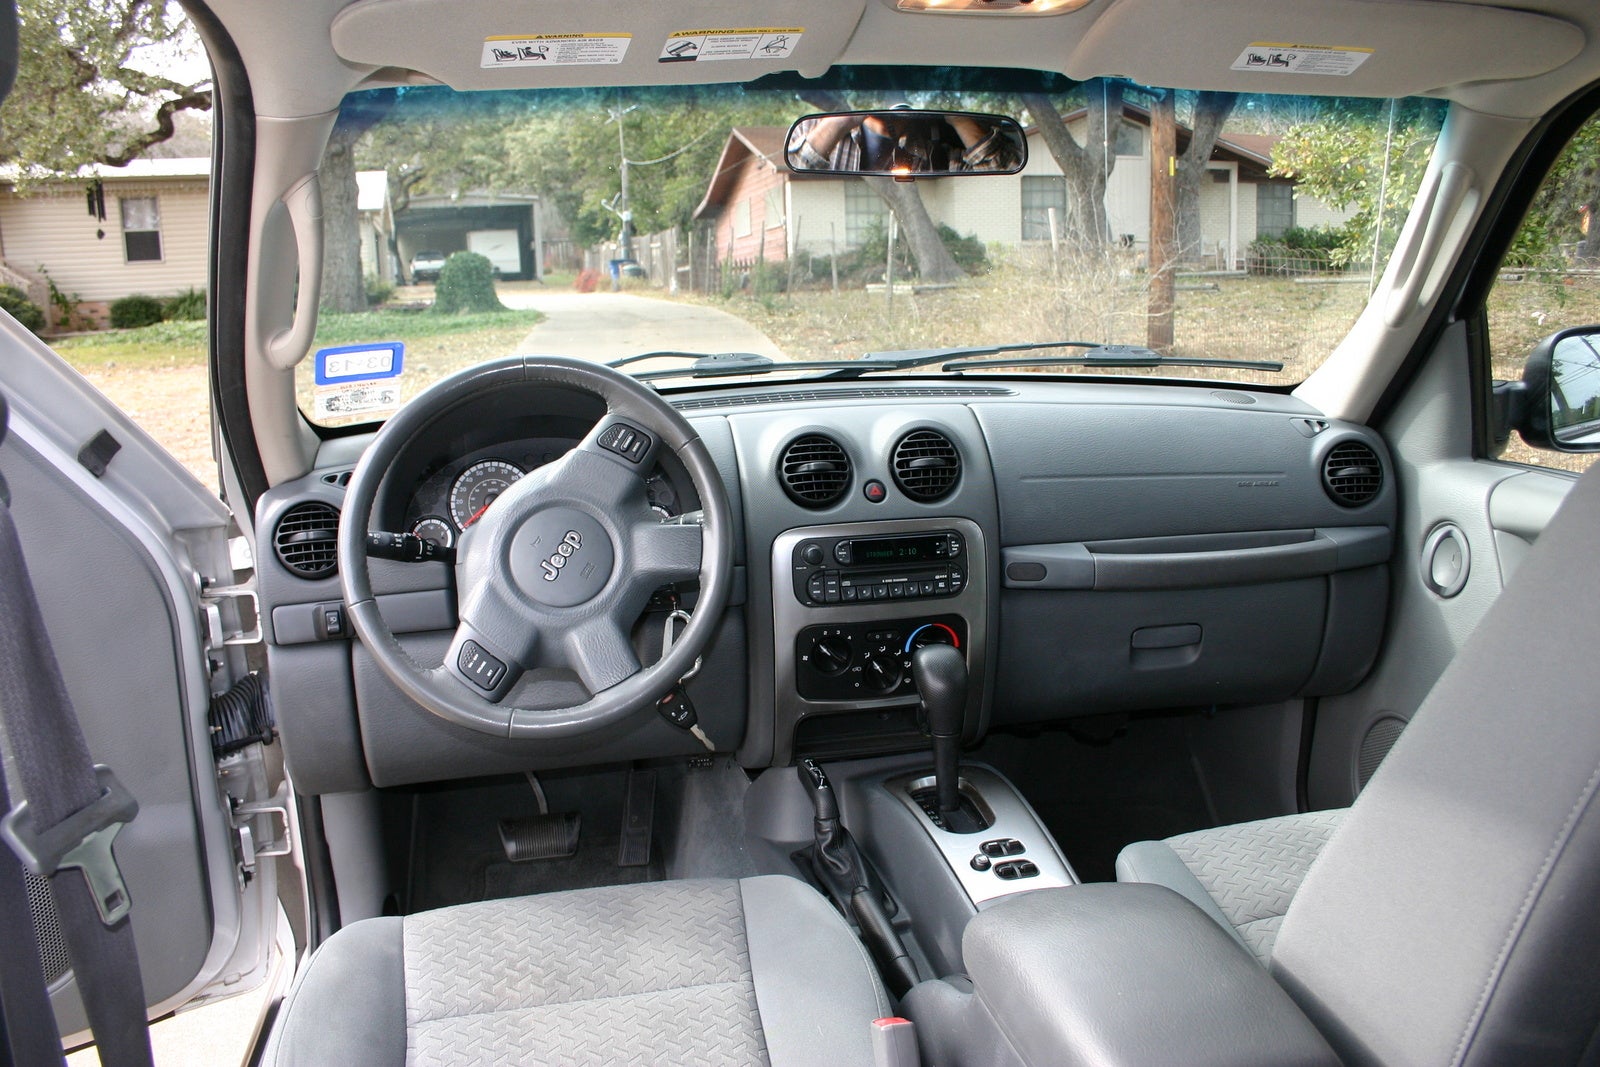 2006 Jeep Liberty - Pictures - CarGurus